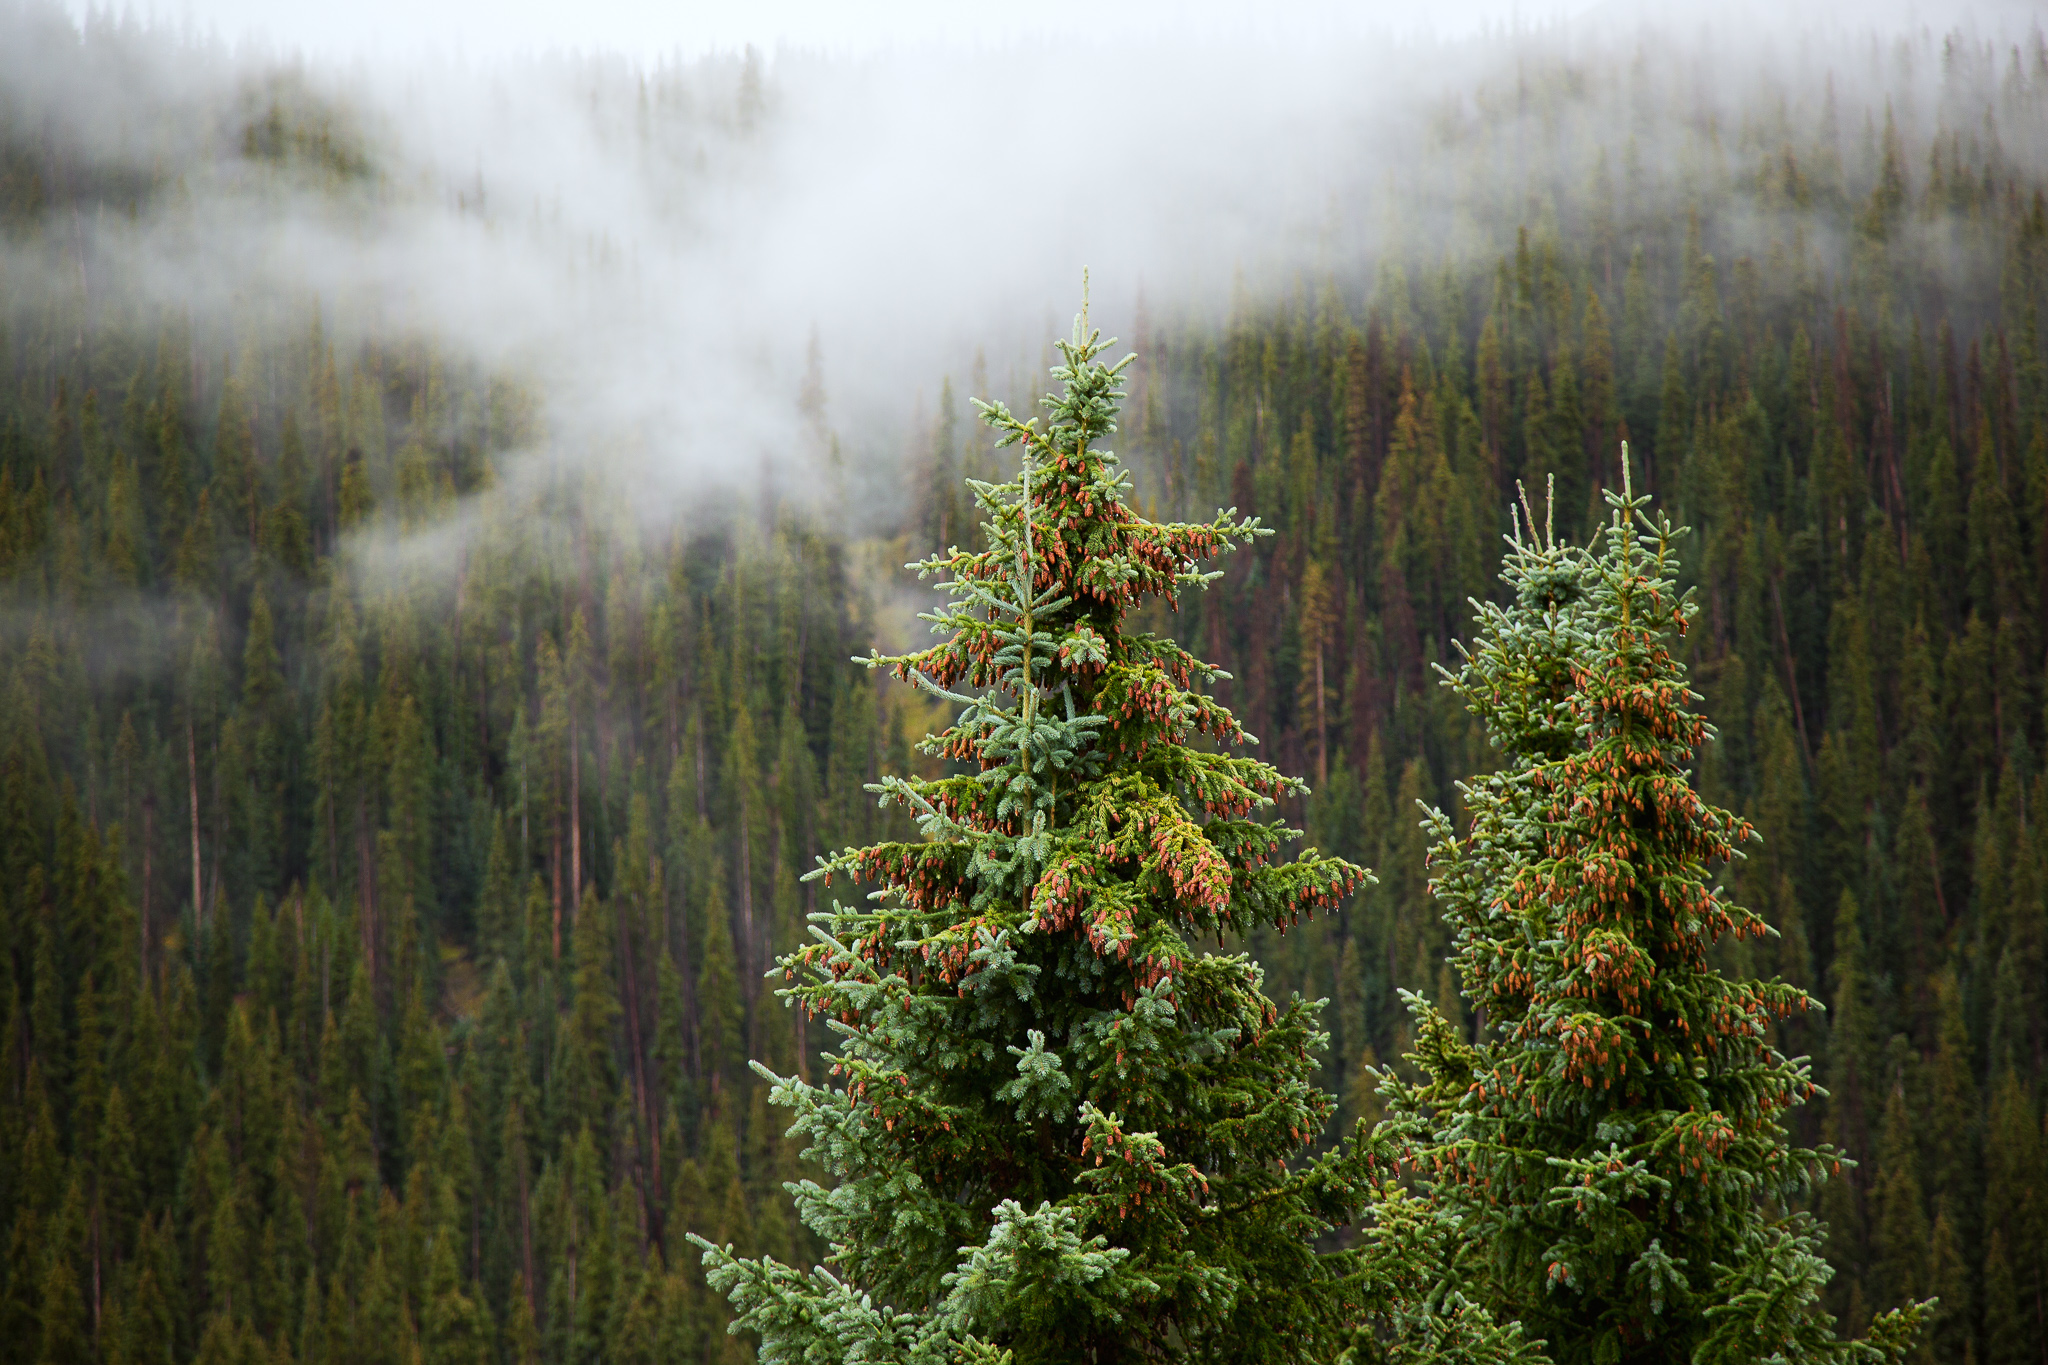 Trees in the Fog, San Juan National Forest, CO